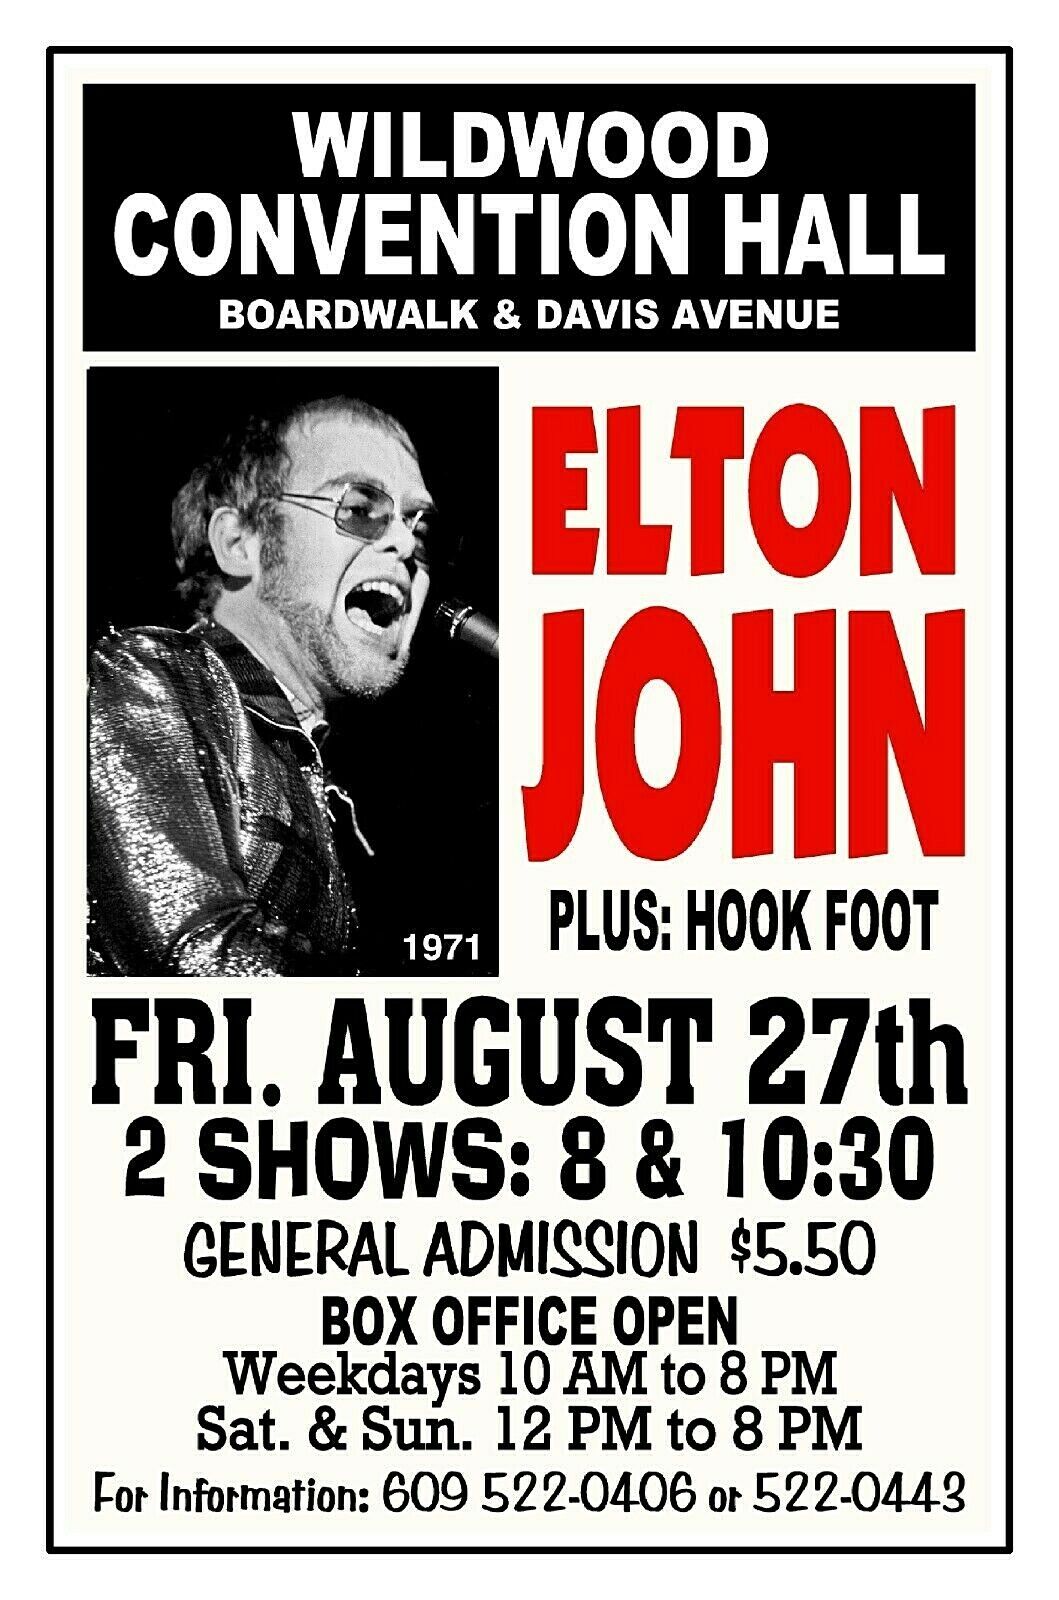 ELTON JOHN 1971 Wildwood NJ CONVENTION HALL POSTER/SIGN by THouse 